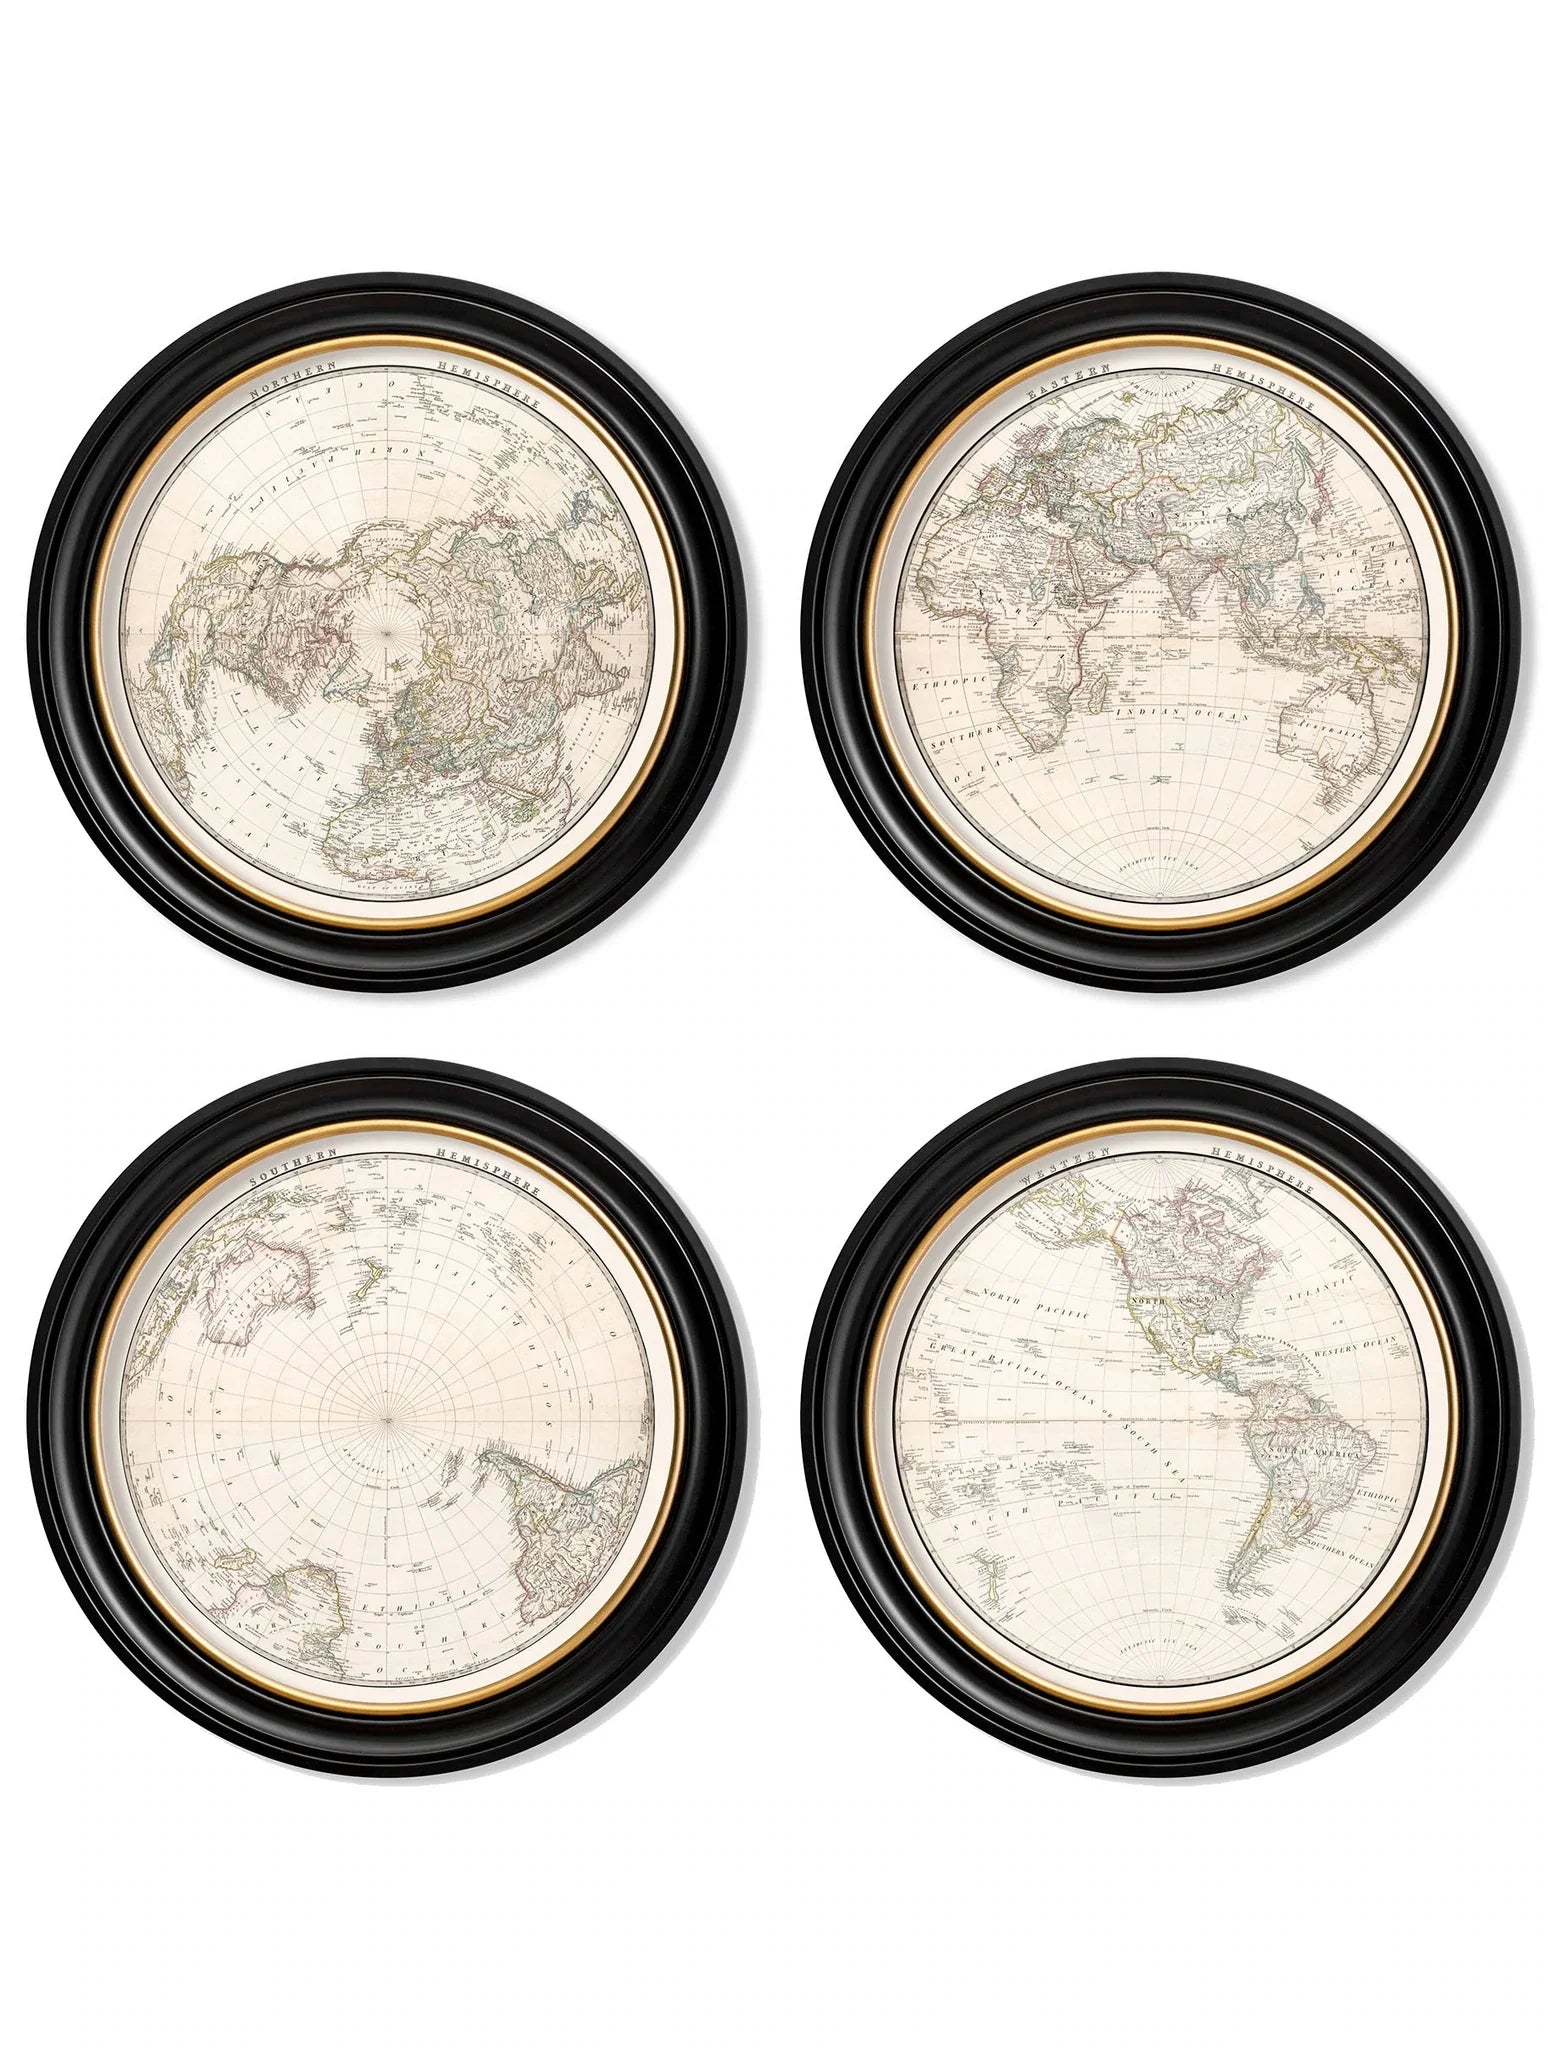 C.1838 World Map Hemispheres In Round Frames for sale - Woodcock and Cavendish